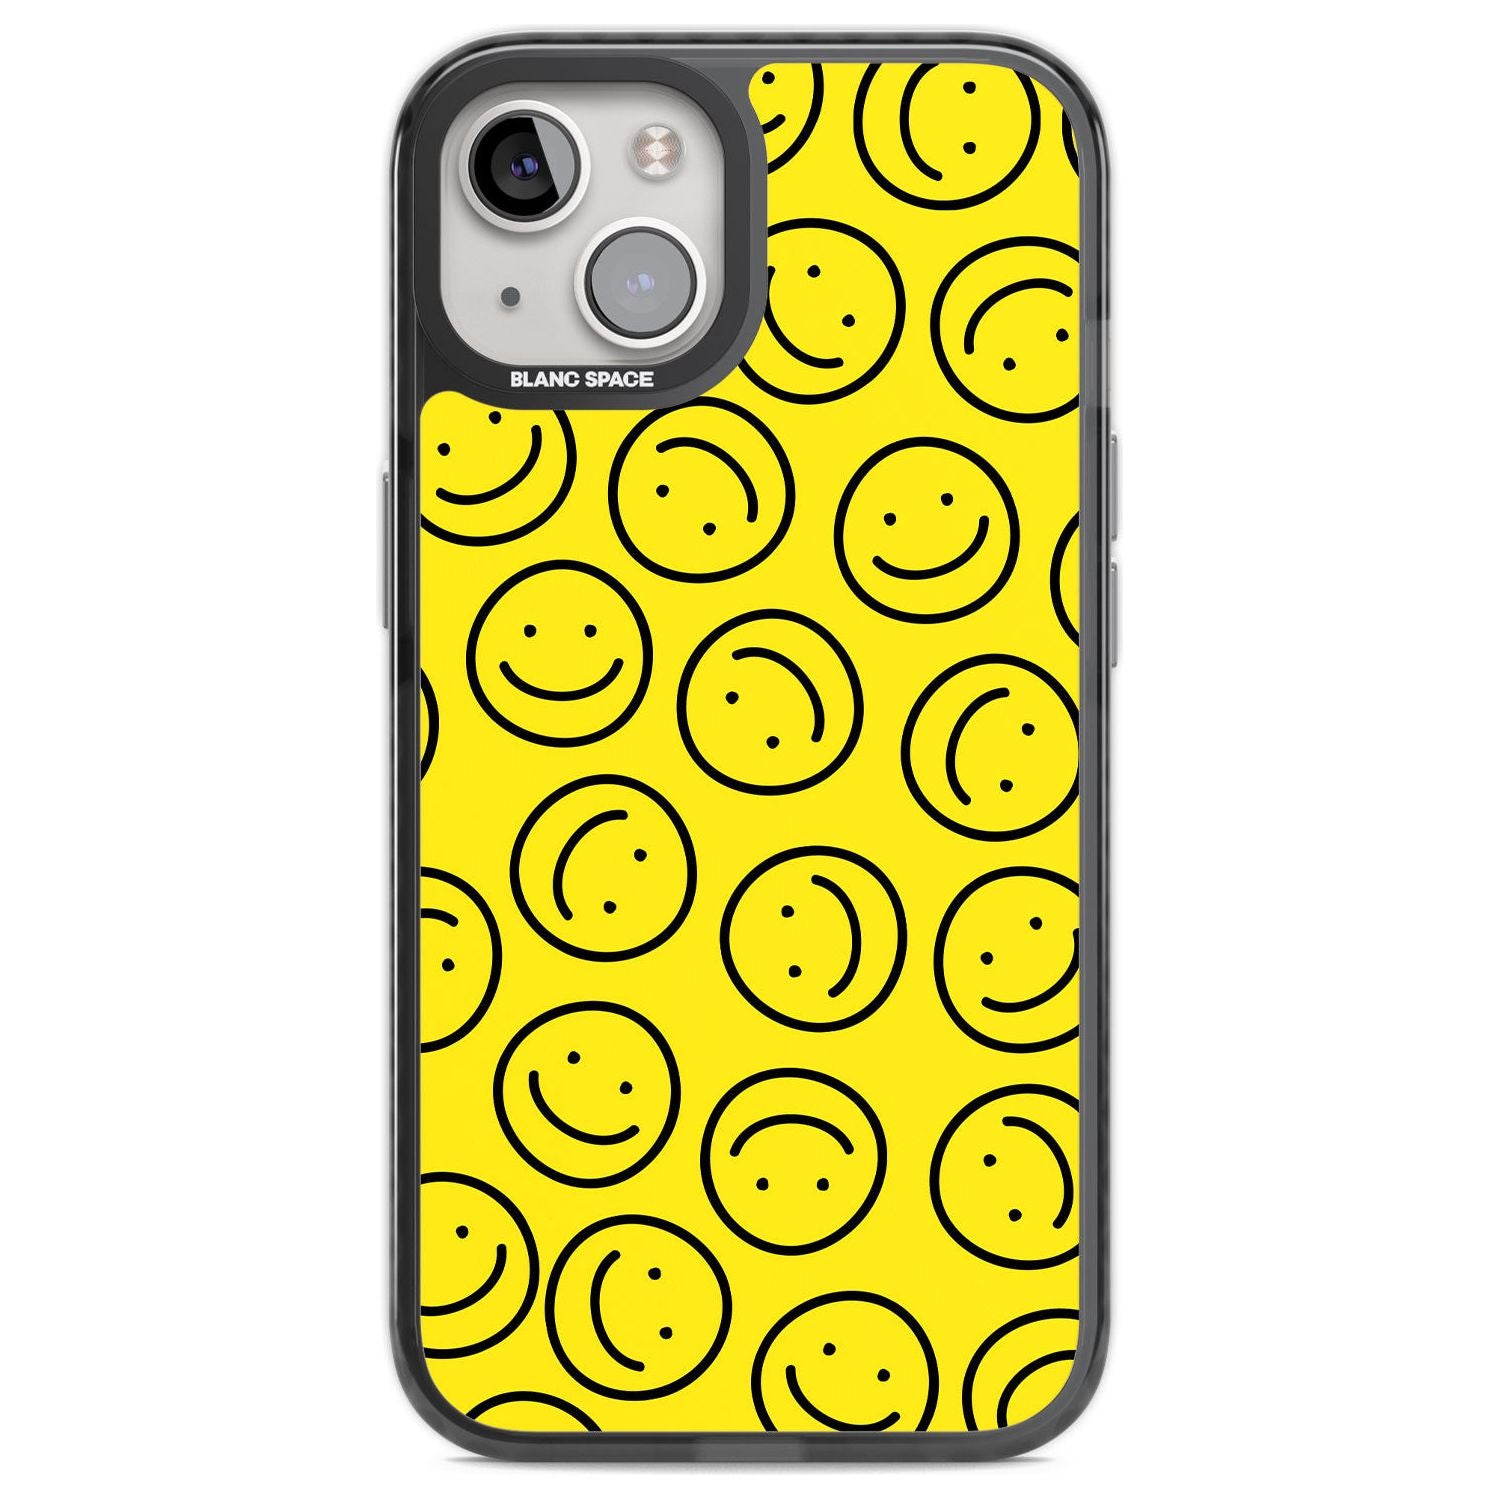 Happy Face Pattern Phone Case iPhone 12 / Black Impact Case,iPhone 13 / Black Impact Case,iPhone 12 Pro / Black Impact Case,iPhone 14 / Black Impact Case,iPhone 15 Plus / Black Impact Case,iPhone 15 / Black Impact Case Blanc Space